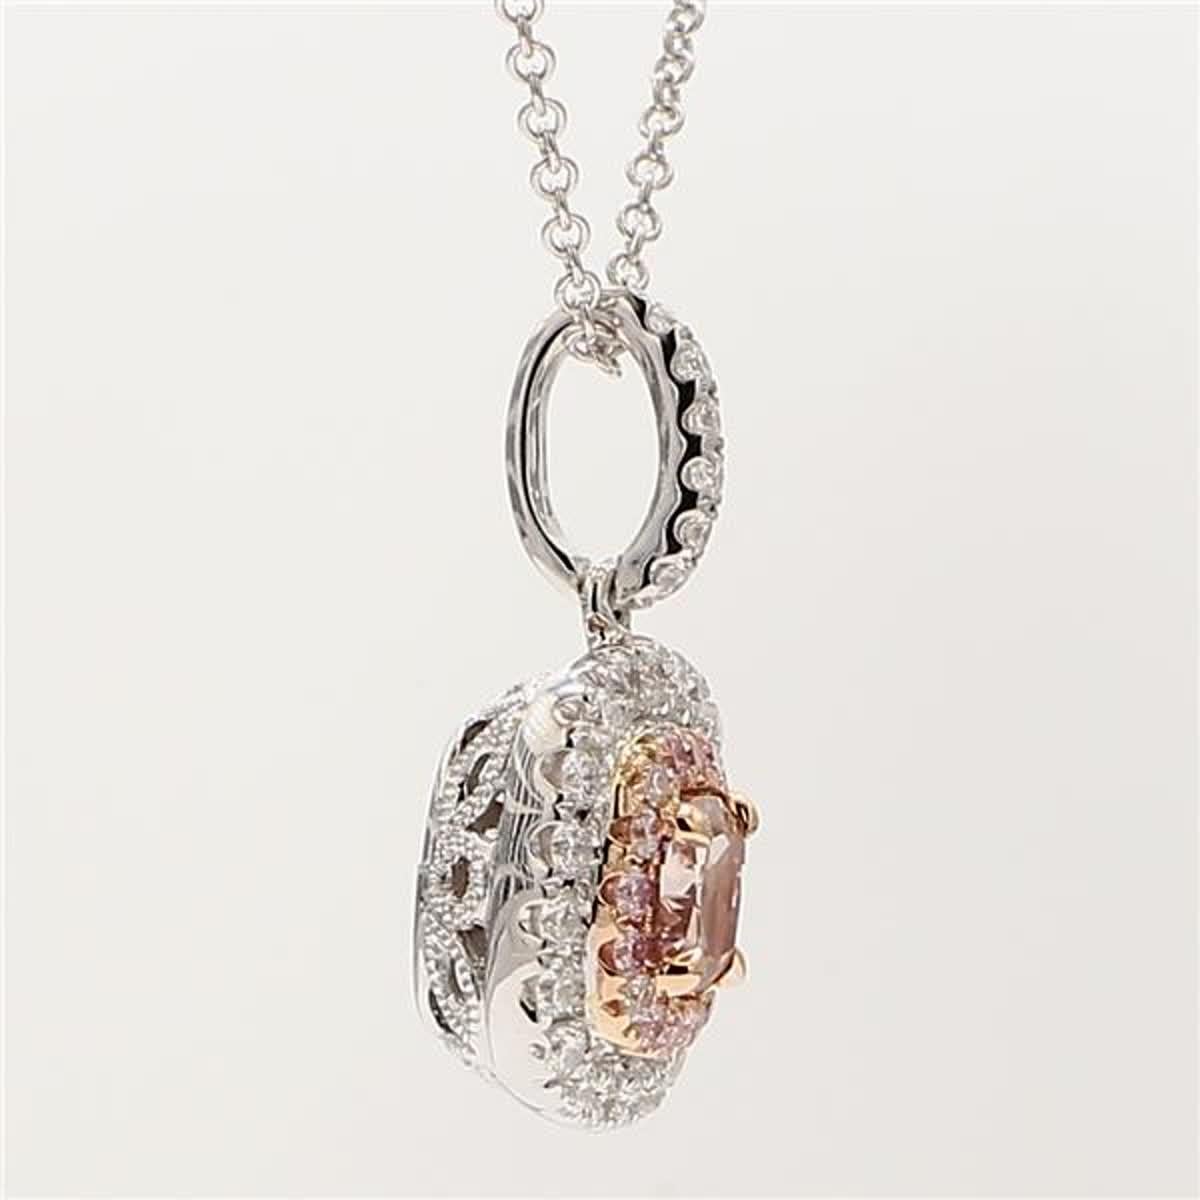 Cushion Cut GIA Certified Natural Pink Cushion and White Diamond .93 Carat TW Gold Pendant For Sale